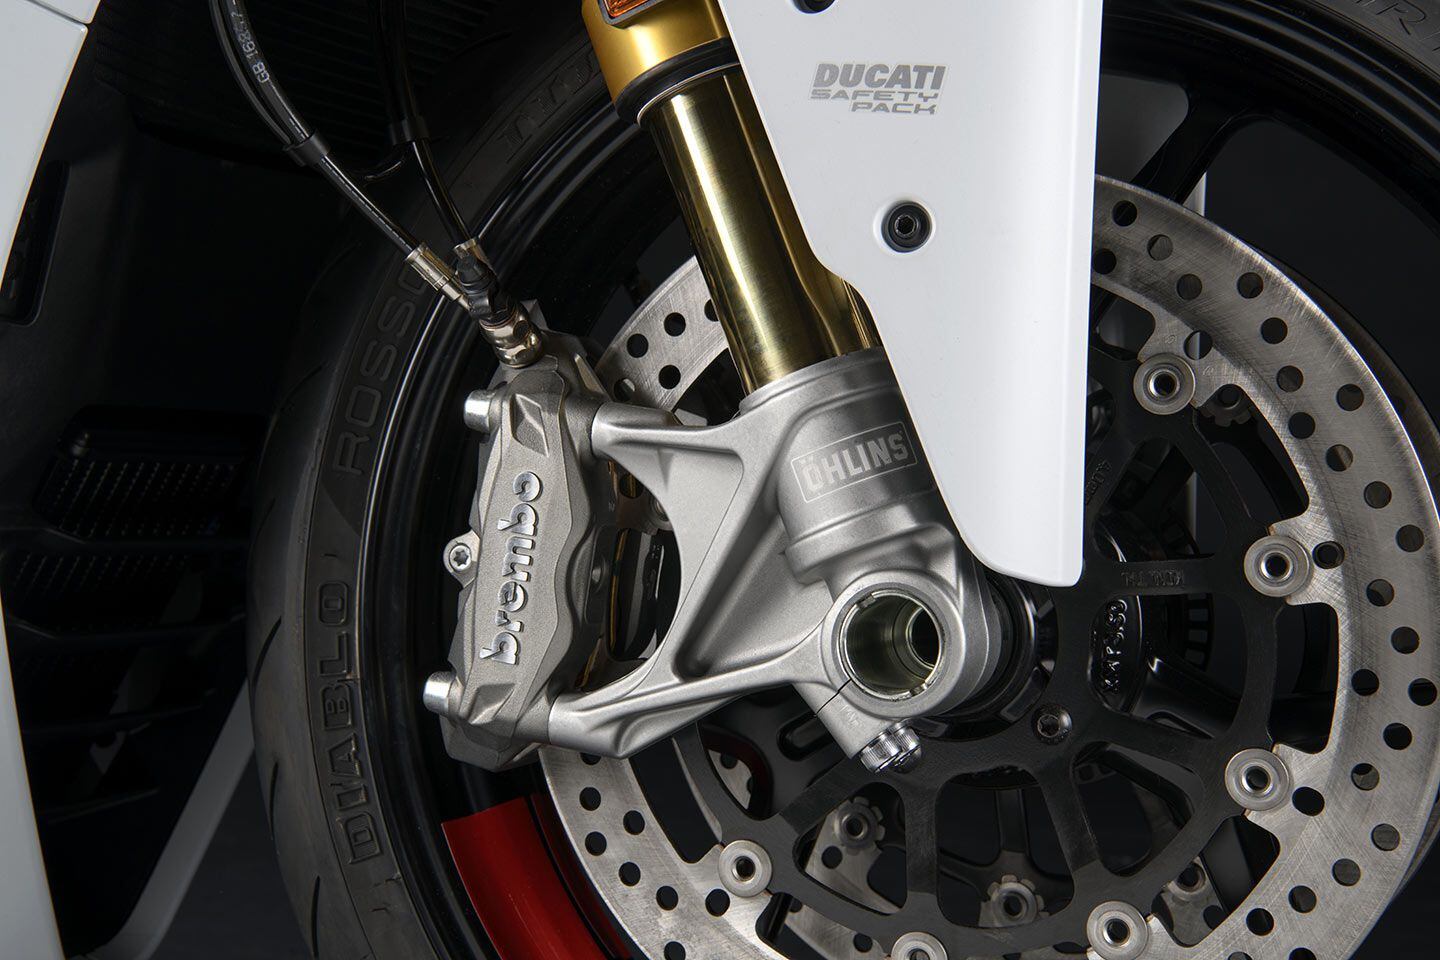 There’s no difference in braking package for standard and S models. Both SuperSport 950s come equipped with Brembo M4.32 calipers.